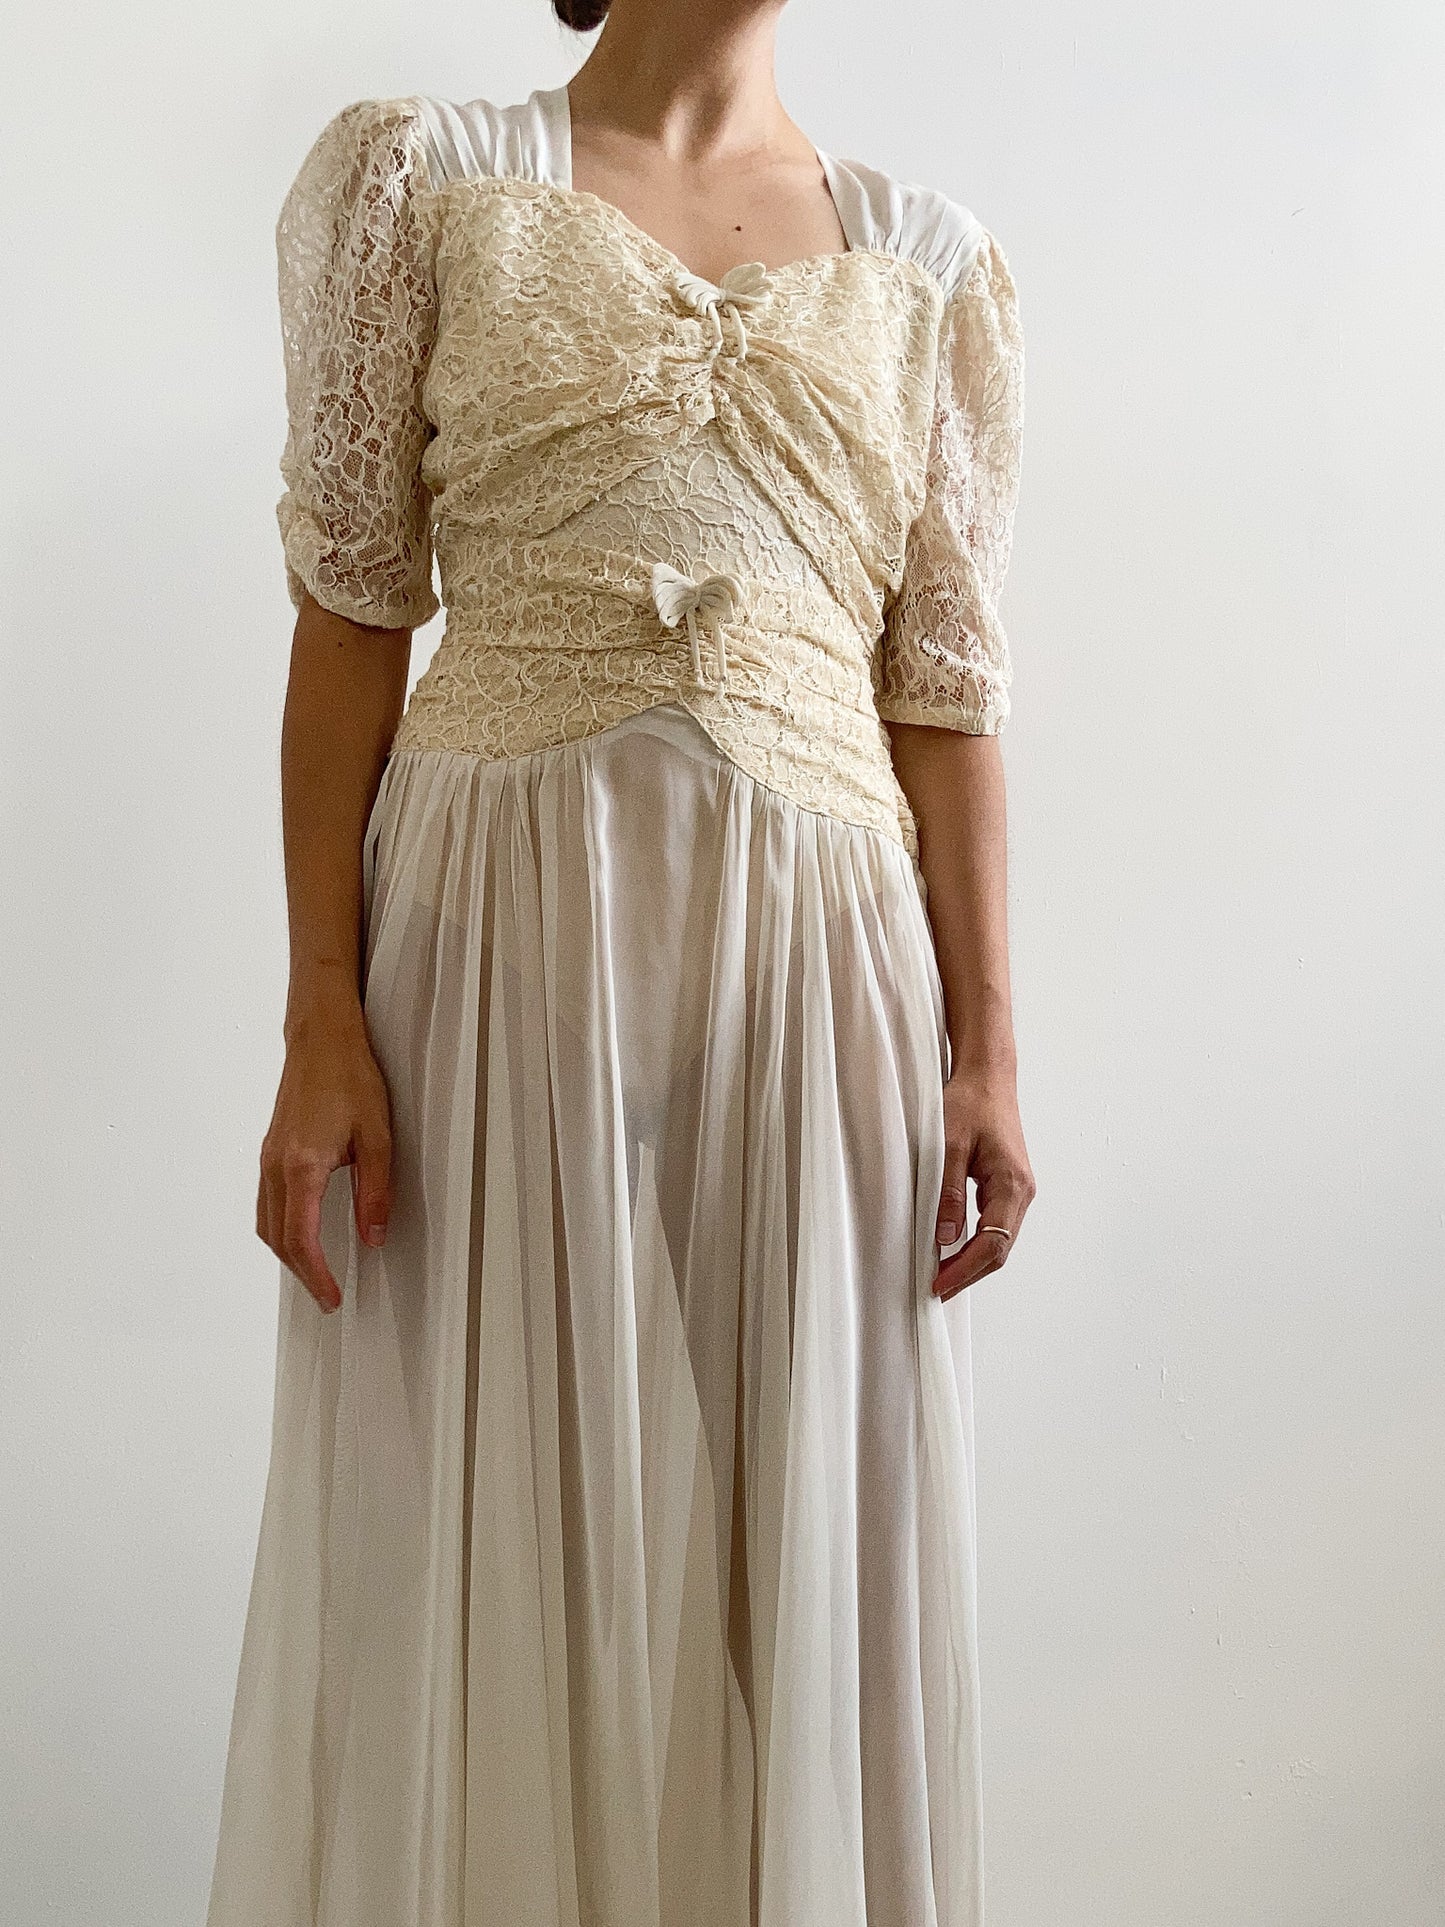 1940s Champagne Lace and Chiffon Wedding Dress with Bows